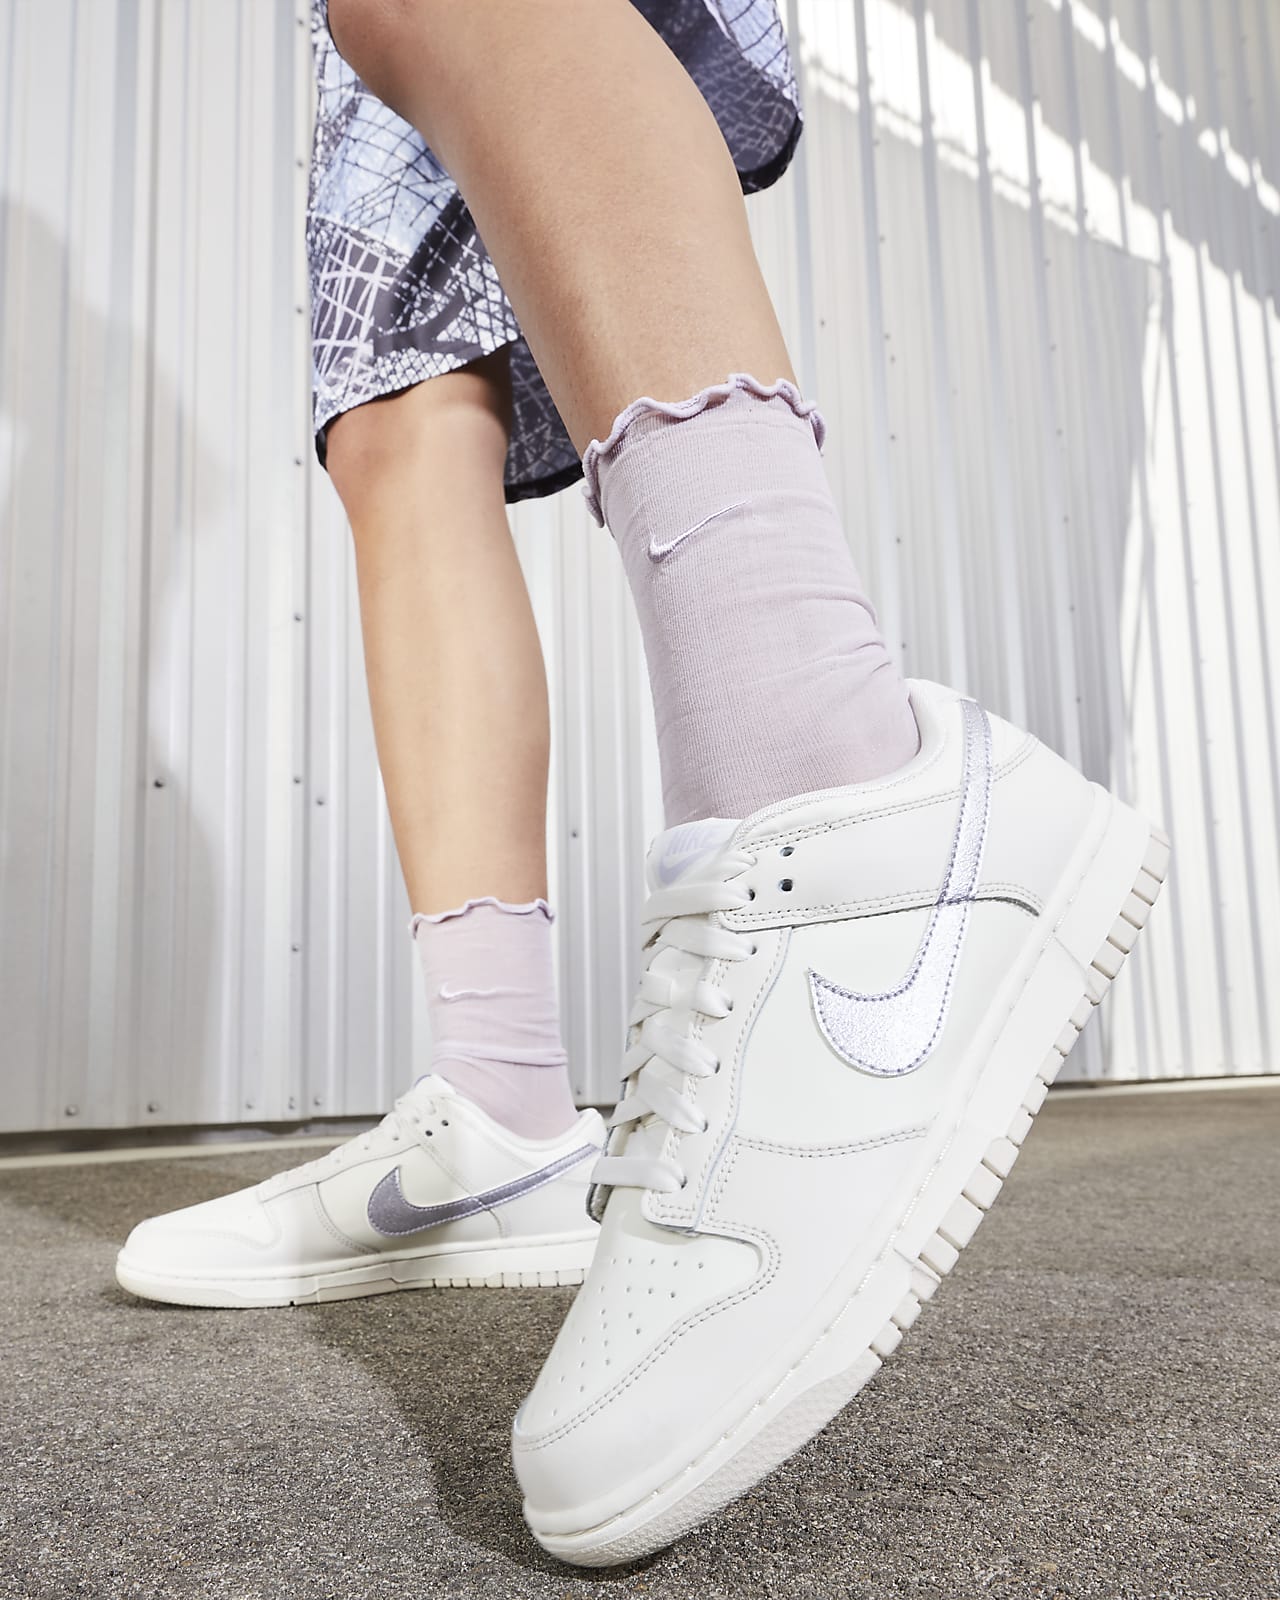 Chaussures et baskets femme Nike W Dunk Low White/ White-White